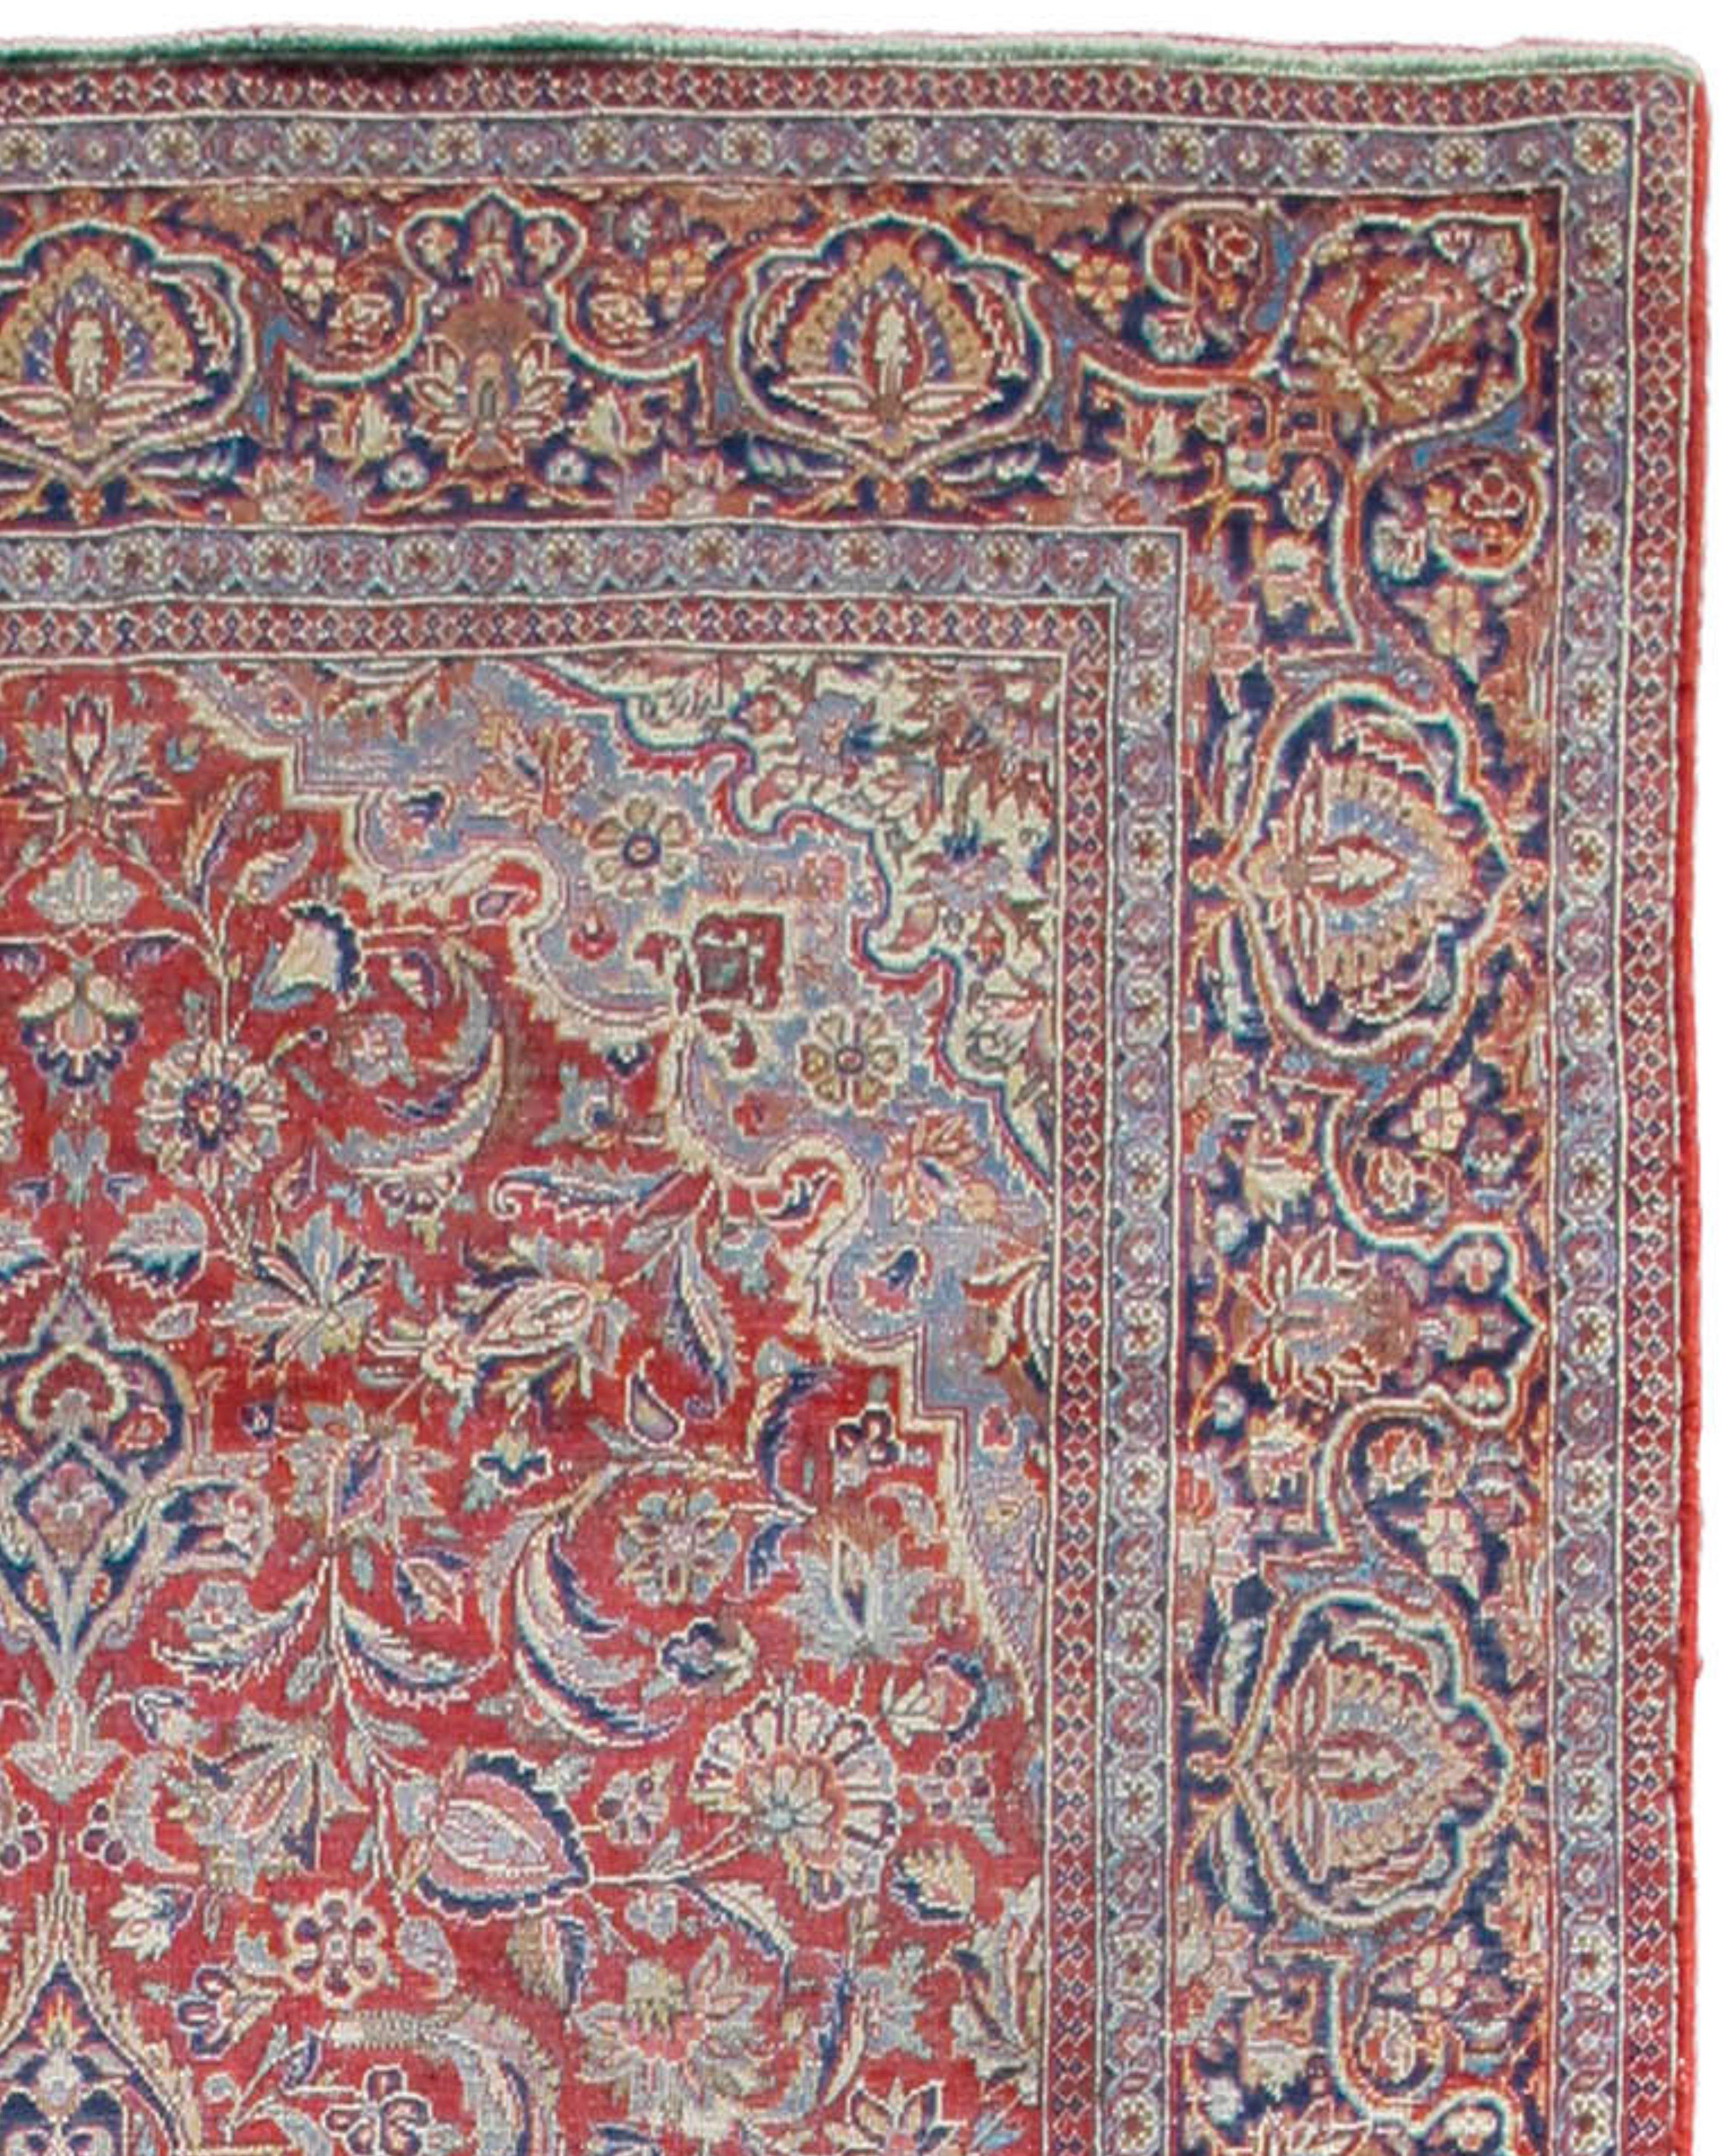 Kashan Rug, Early 20th Century

Additional Information:
Dimensions: 4'3